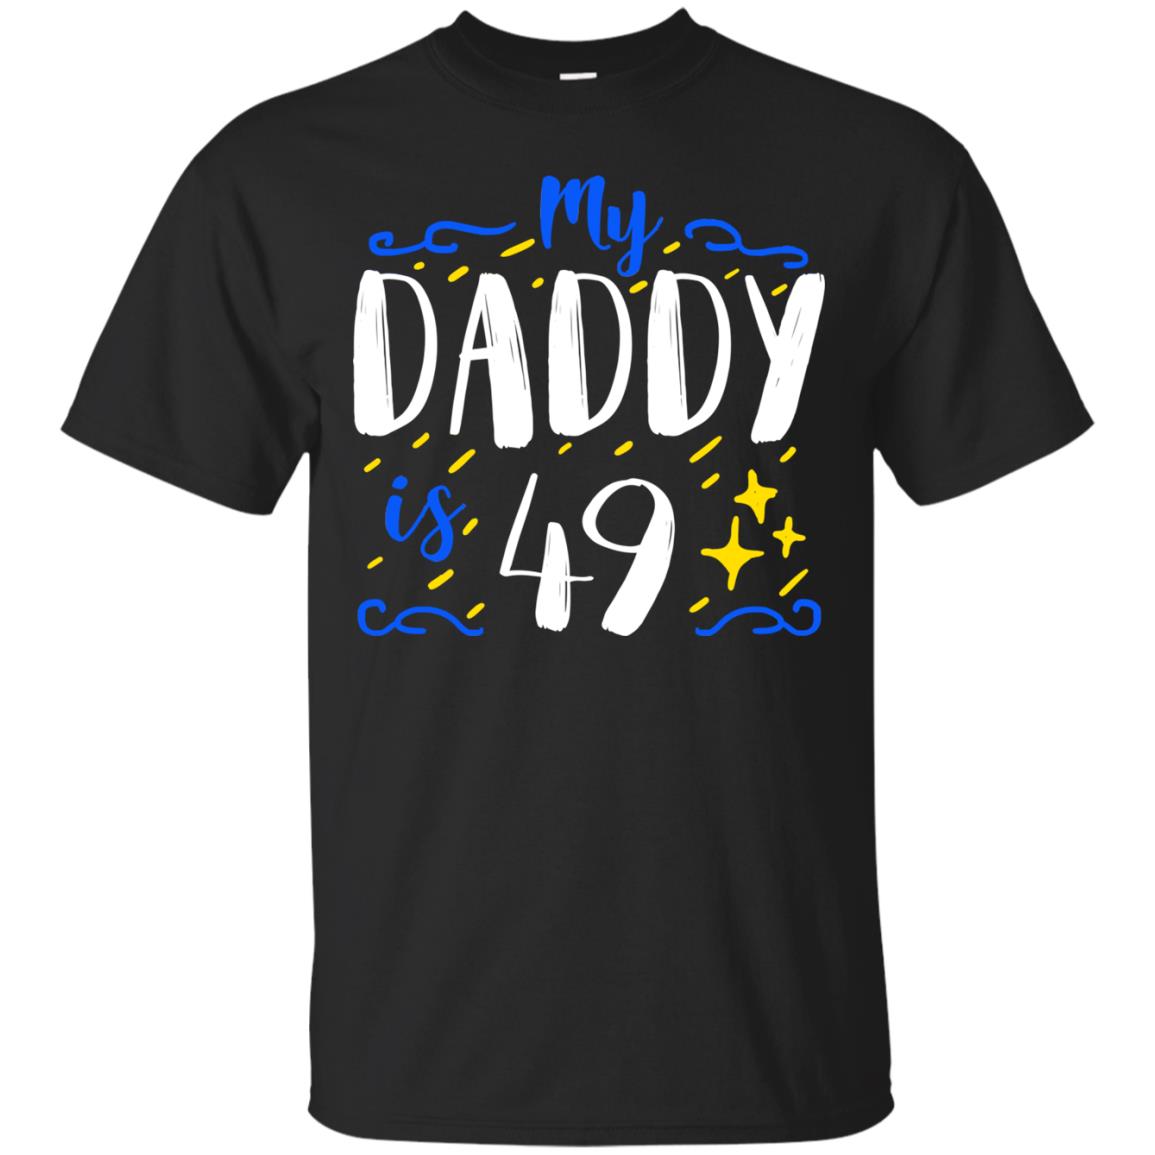 My Daddy Is 49 49th Birthday Daddy Shirt For Sons Or DaughtersG200 Gildan Ultra Cotton T-Shirt